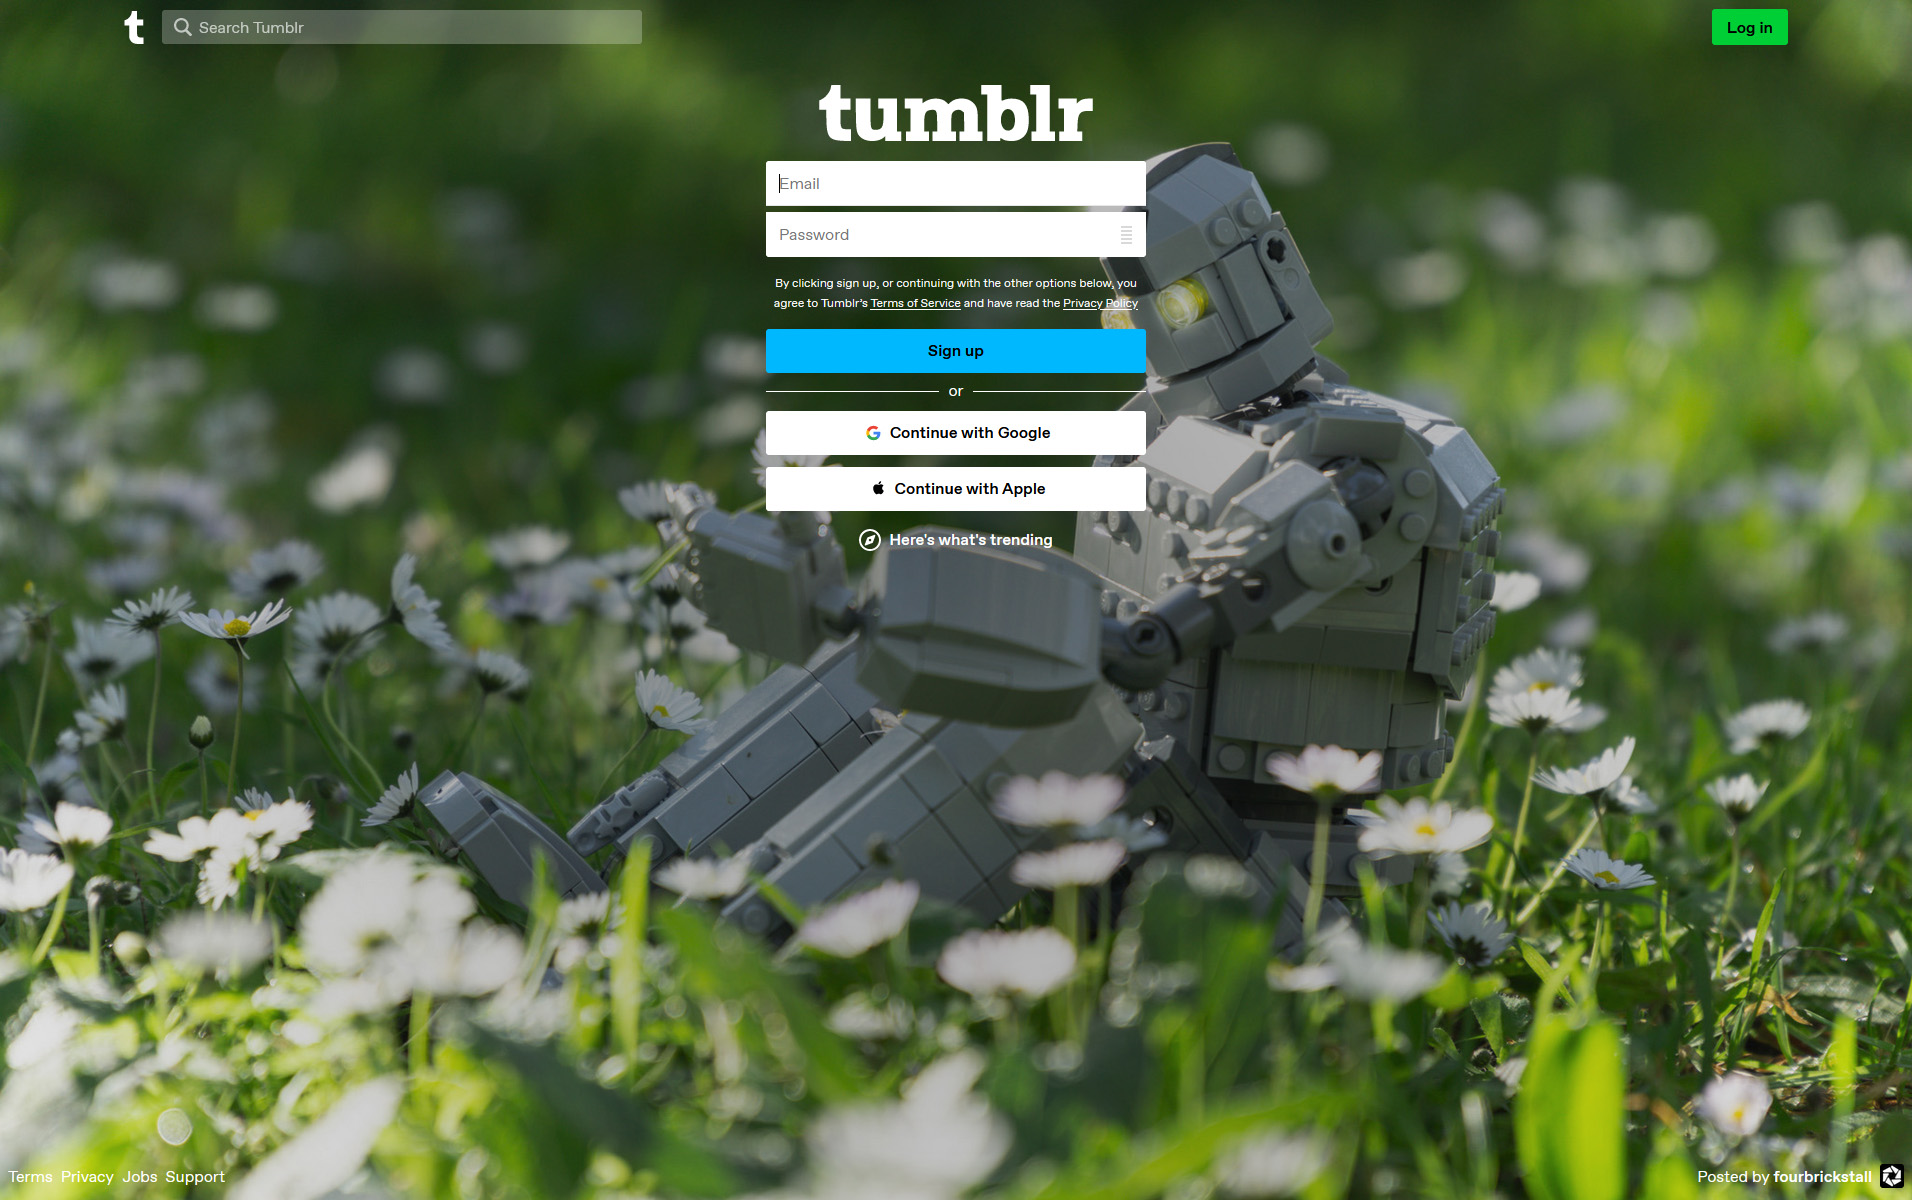 Tumblr feature of LEGO Iron Giant photo on sign up page